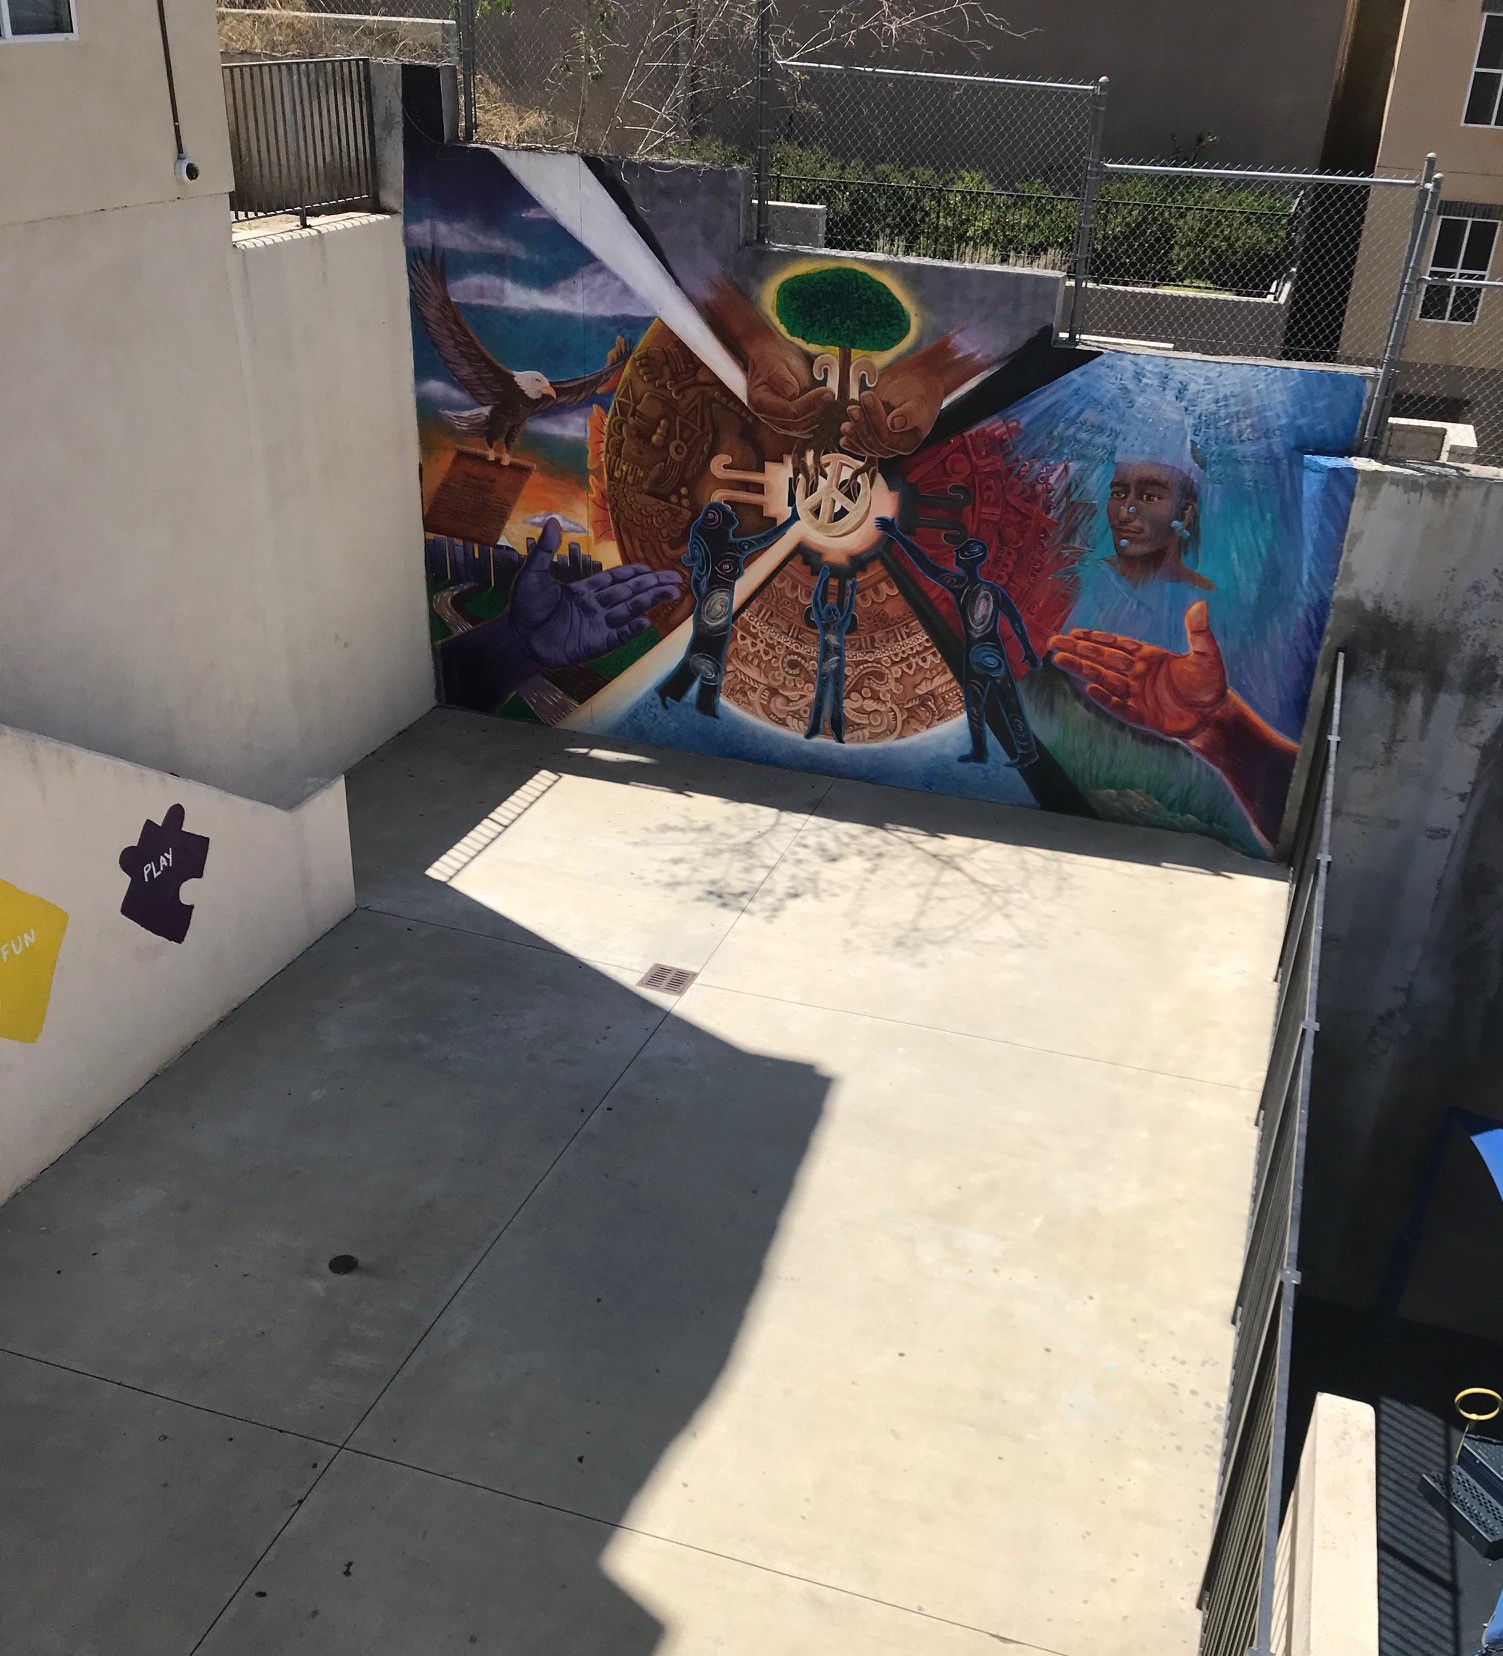 Exterior view of Lorena Terrace showing a colorful mural on a wall of the basketball court